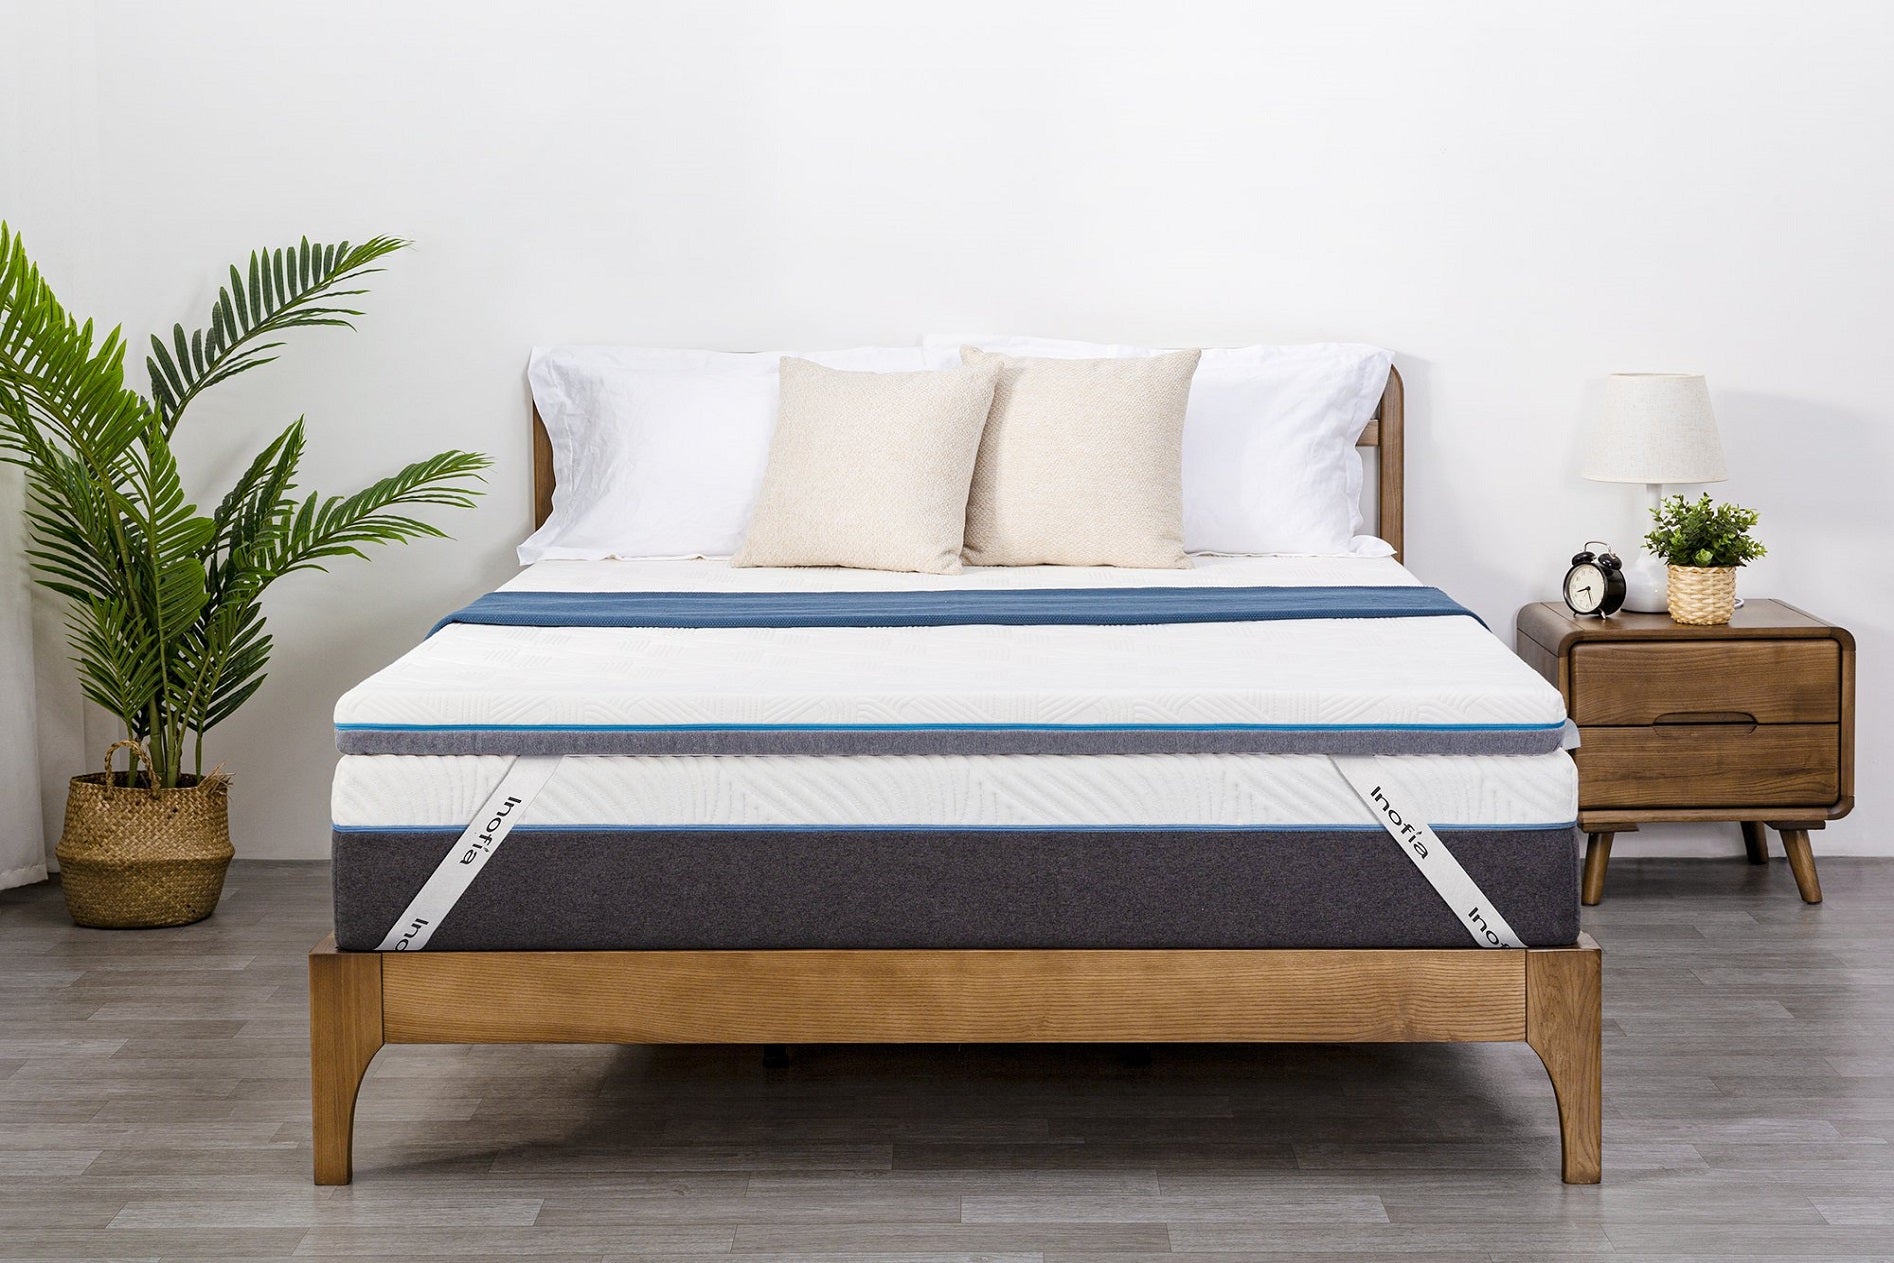 Benefits of buying a double bed mattress topper that helps you in better sleep